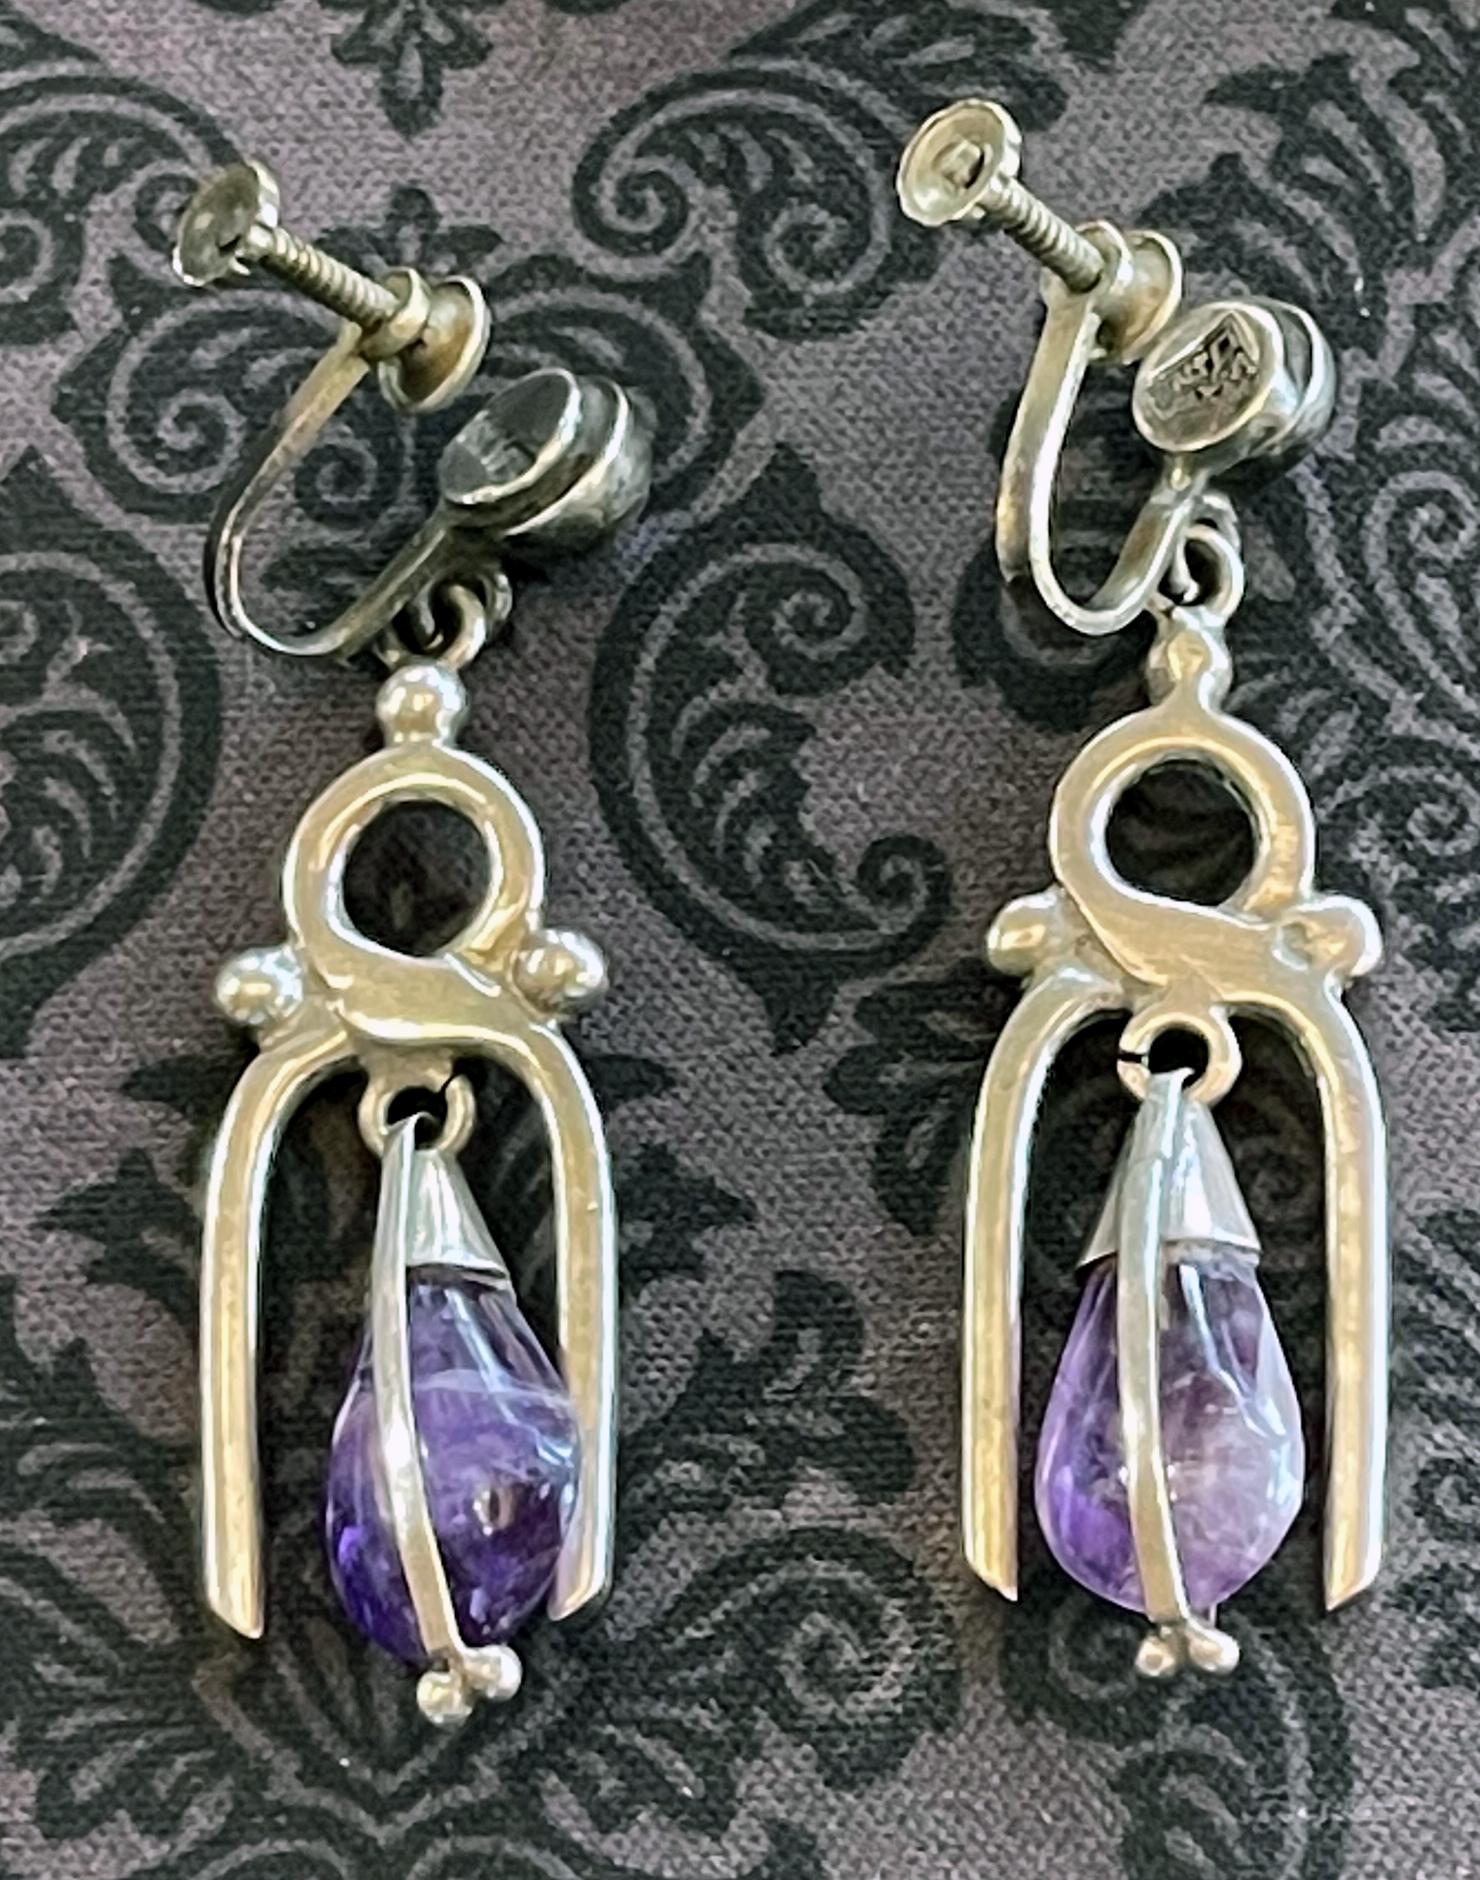 A pair of Mexican modern earrings in sterling silver with teardrop amethyst circa 1950-60s. The earrings are screwed on as shown and marked with his period logo on one and silver on the other. 
Available also are two brooches with similar design.